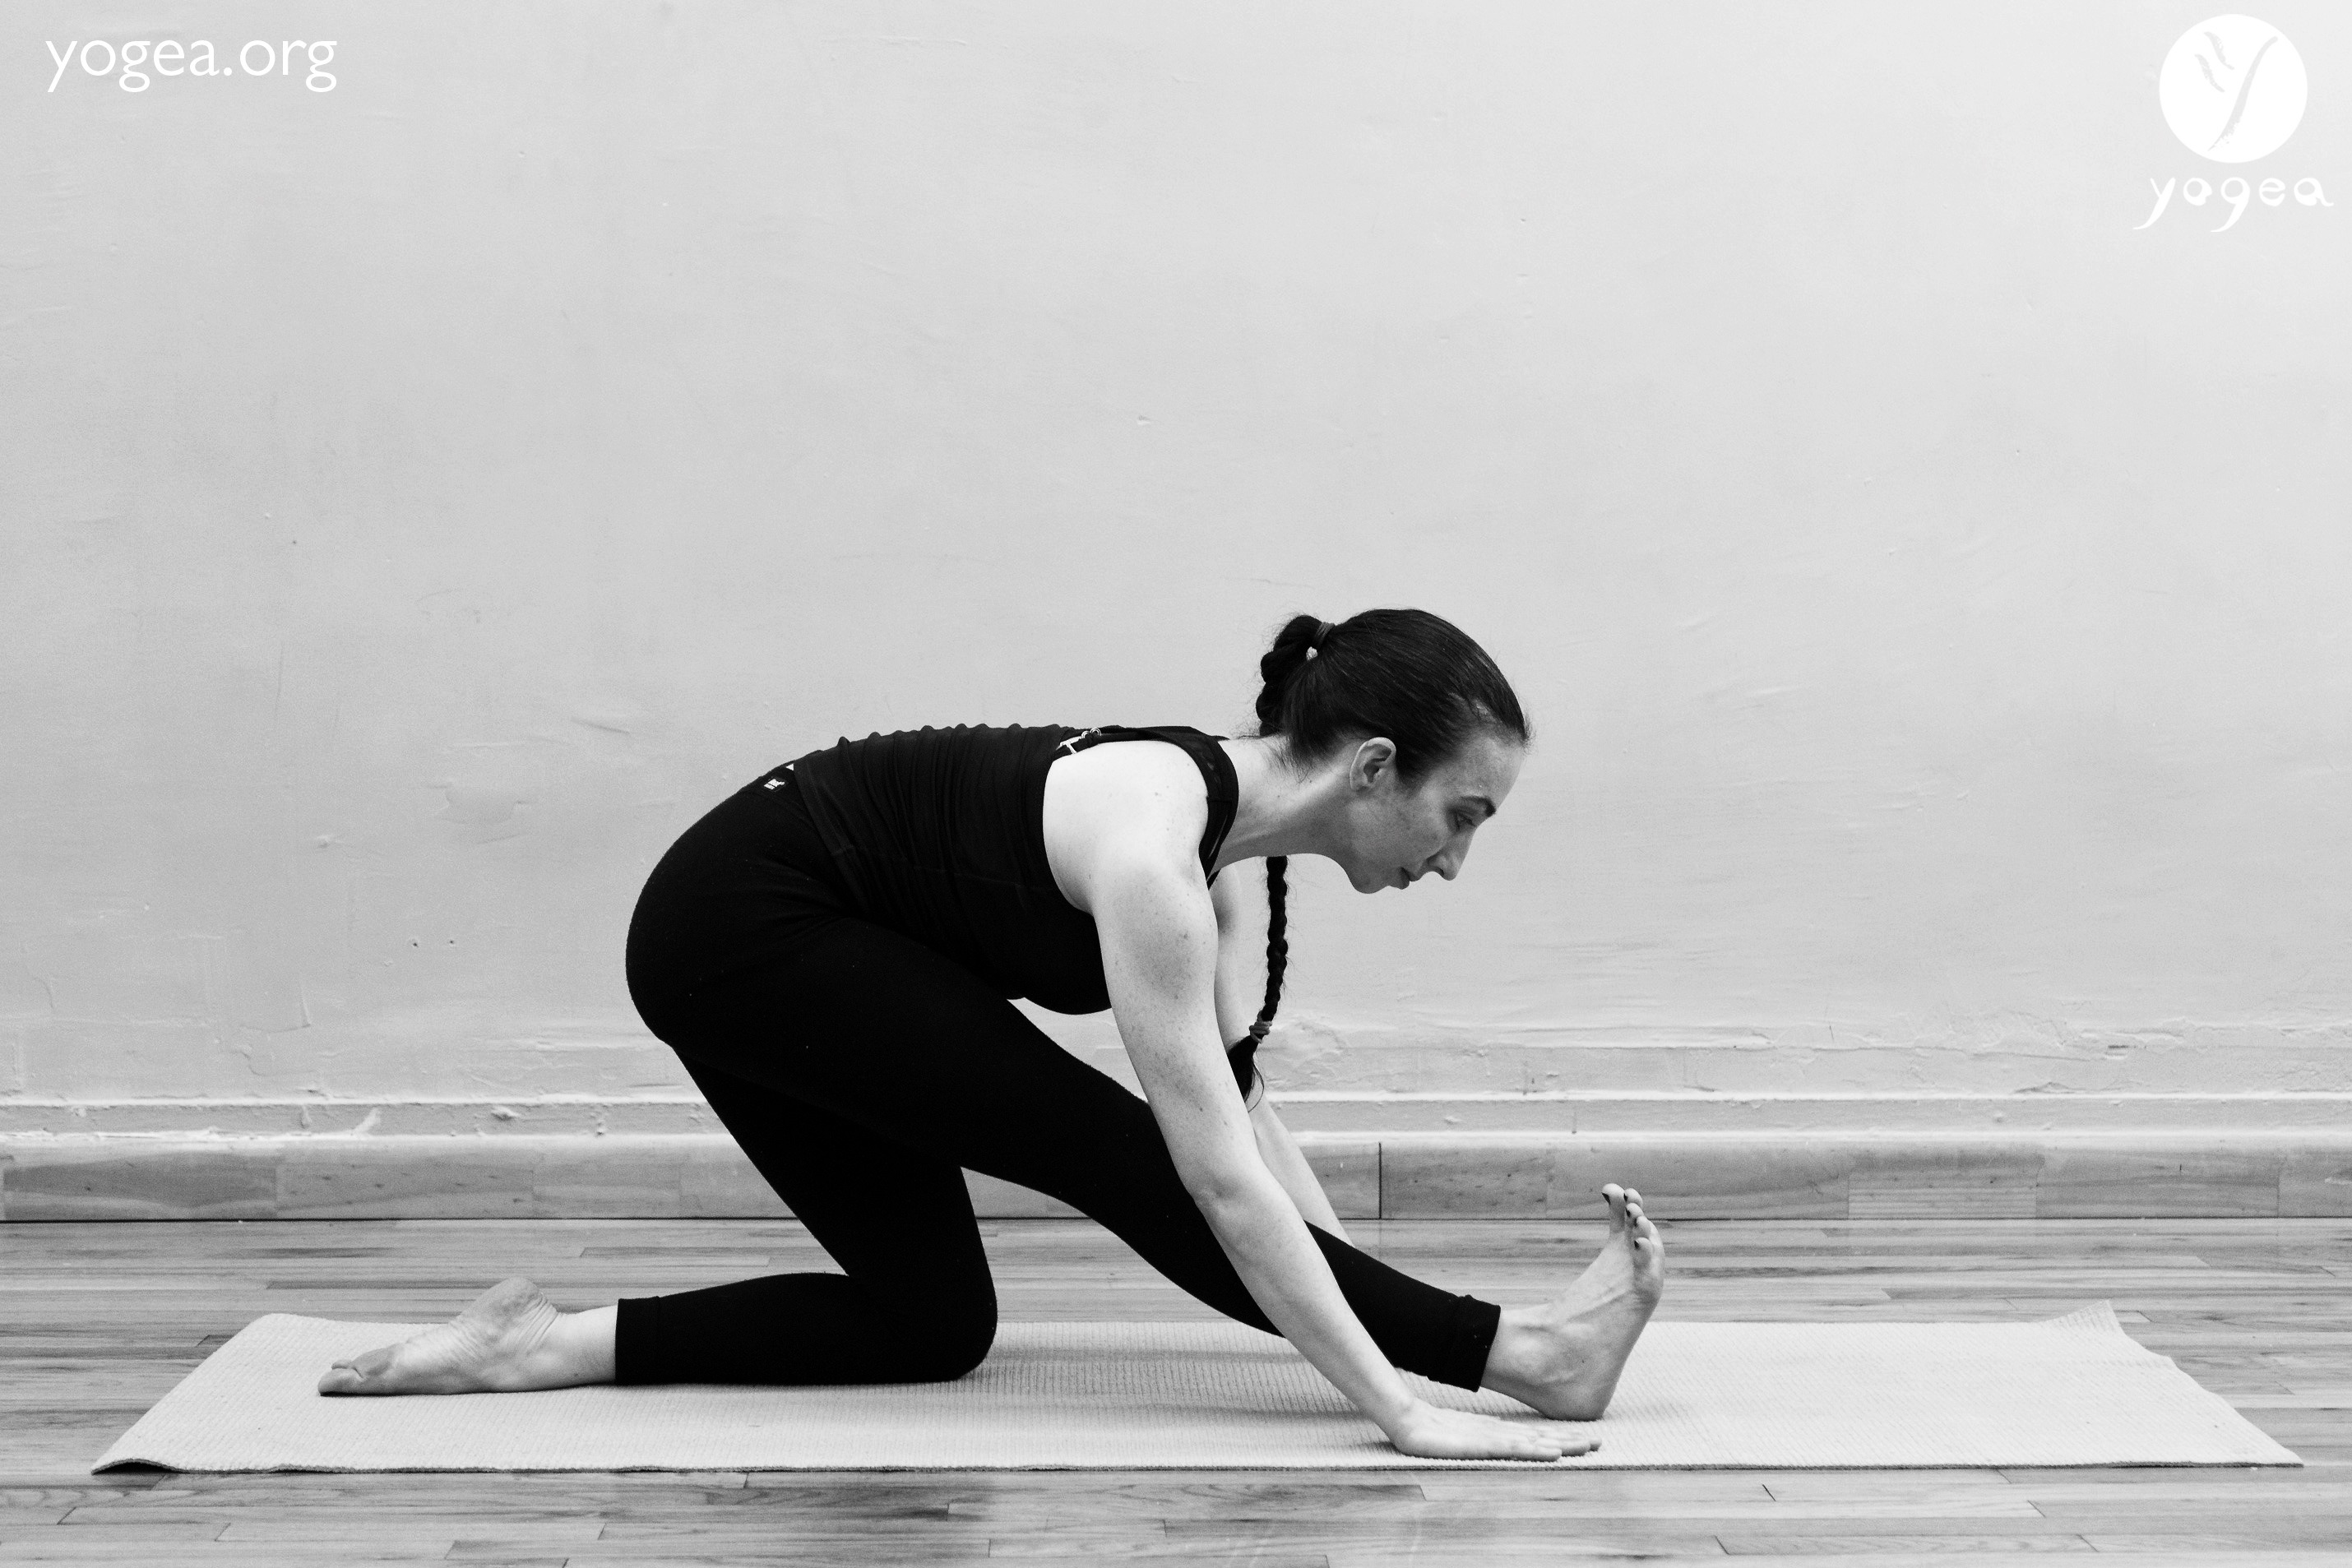 Tummee.com - It's Friday Flow Time!! Learn to teach Kneeling Cat Swan Flow  at https://www.tummee.com/yoga-poses/kneeling-cat-swan-flow Level: Beginner  Position: Sitting Type: Stretch, Forward-Bend, Back-Bend View the #yogapose  at https://www.tummee.com ...